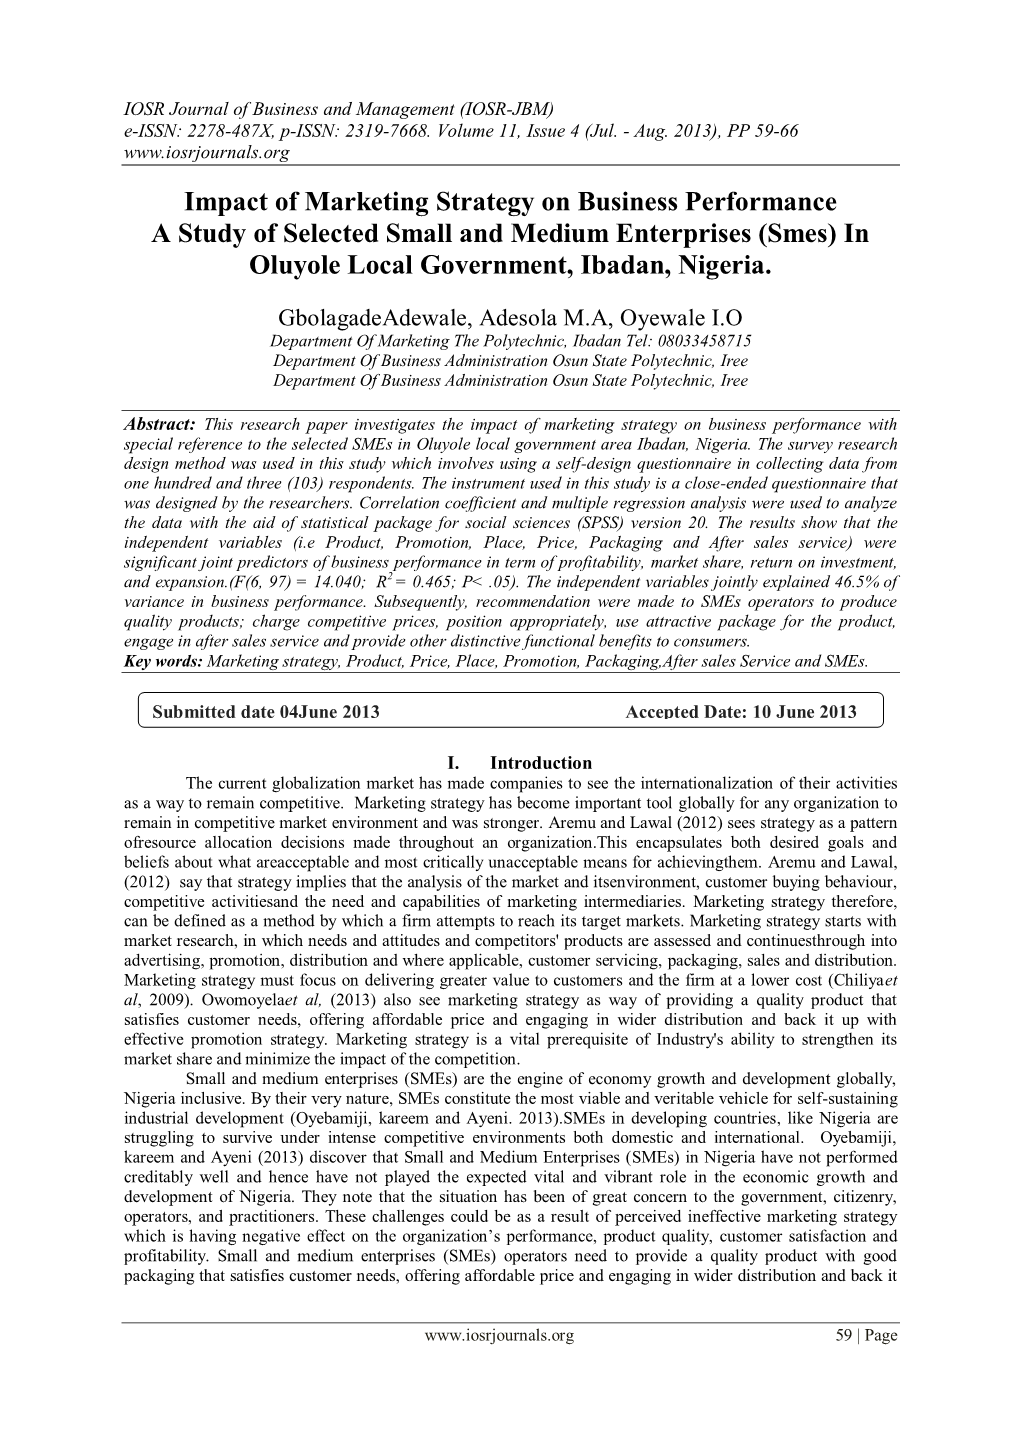 Impact of Marketing Strategy on Business Performance a Study of Selected Small and Medium Enterprises (Smes) in Oluyole Local Government, Ibadan, Nigeria